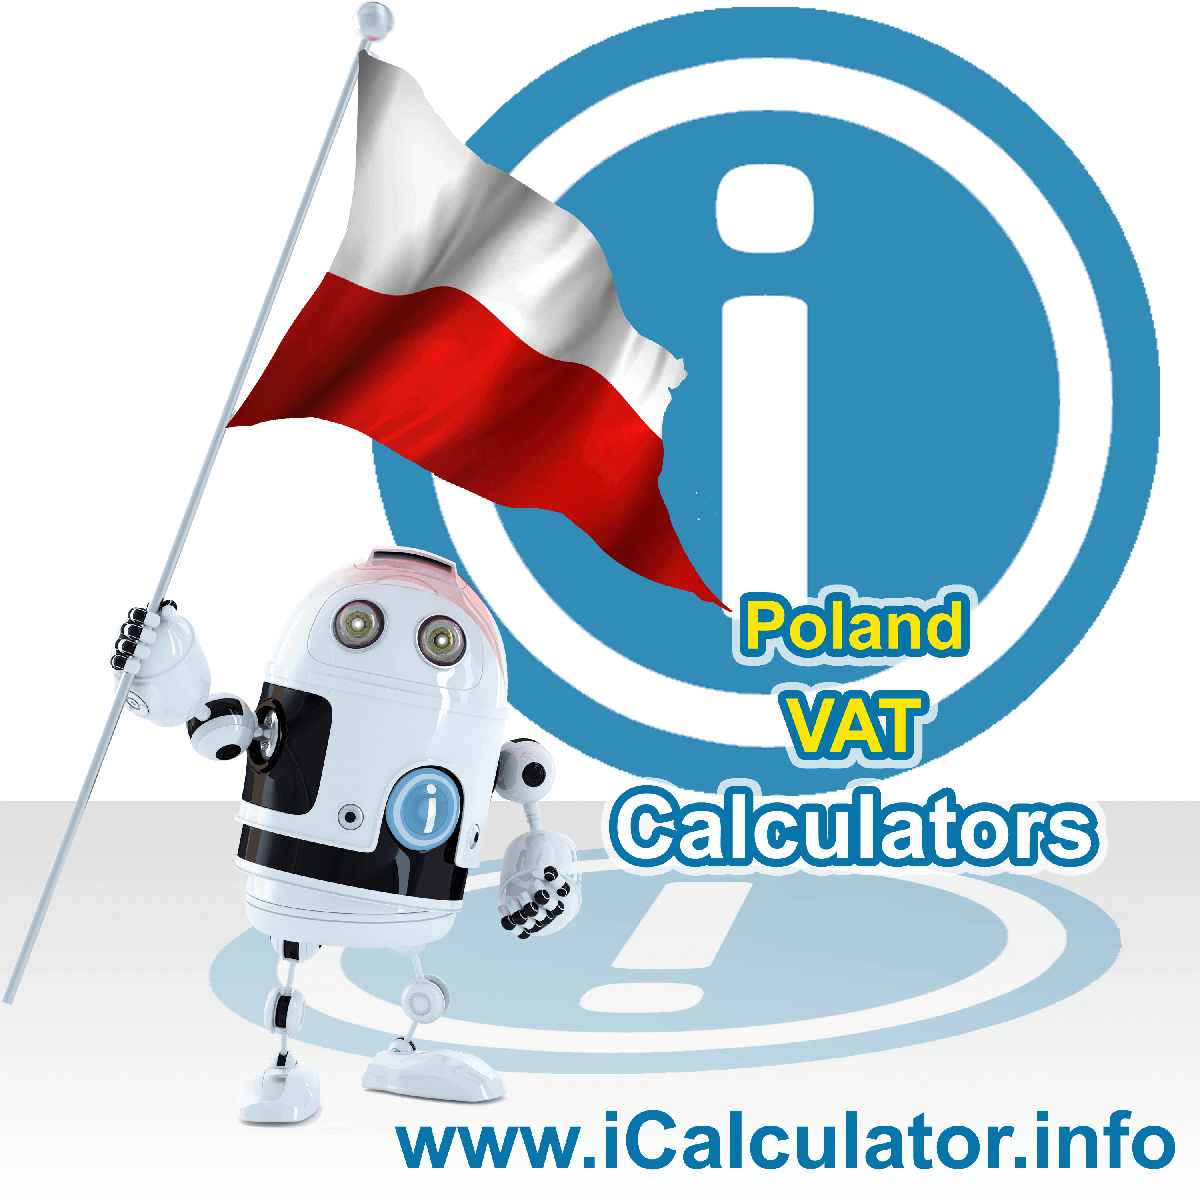 Poland VAT Calculator. This image shows the Poland flag and information relating to the VAT formula used for calculating Value Added Tax in Poland using the Poland VAT Calculator in 2023